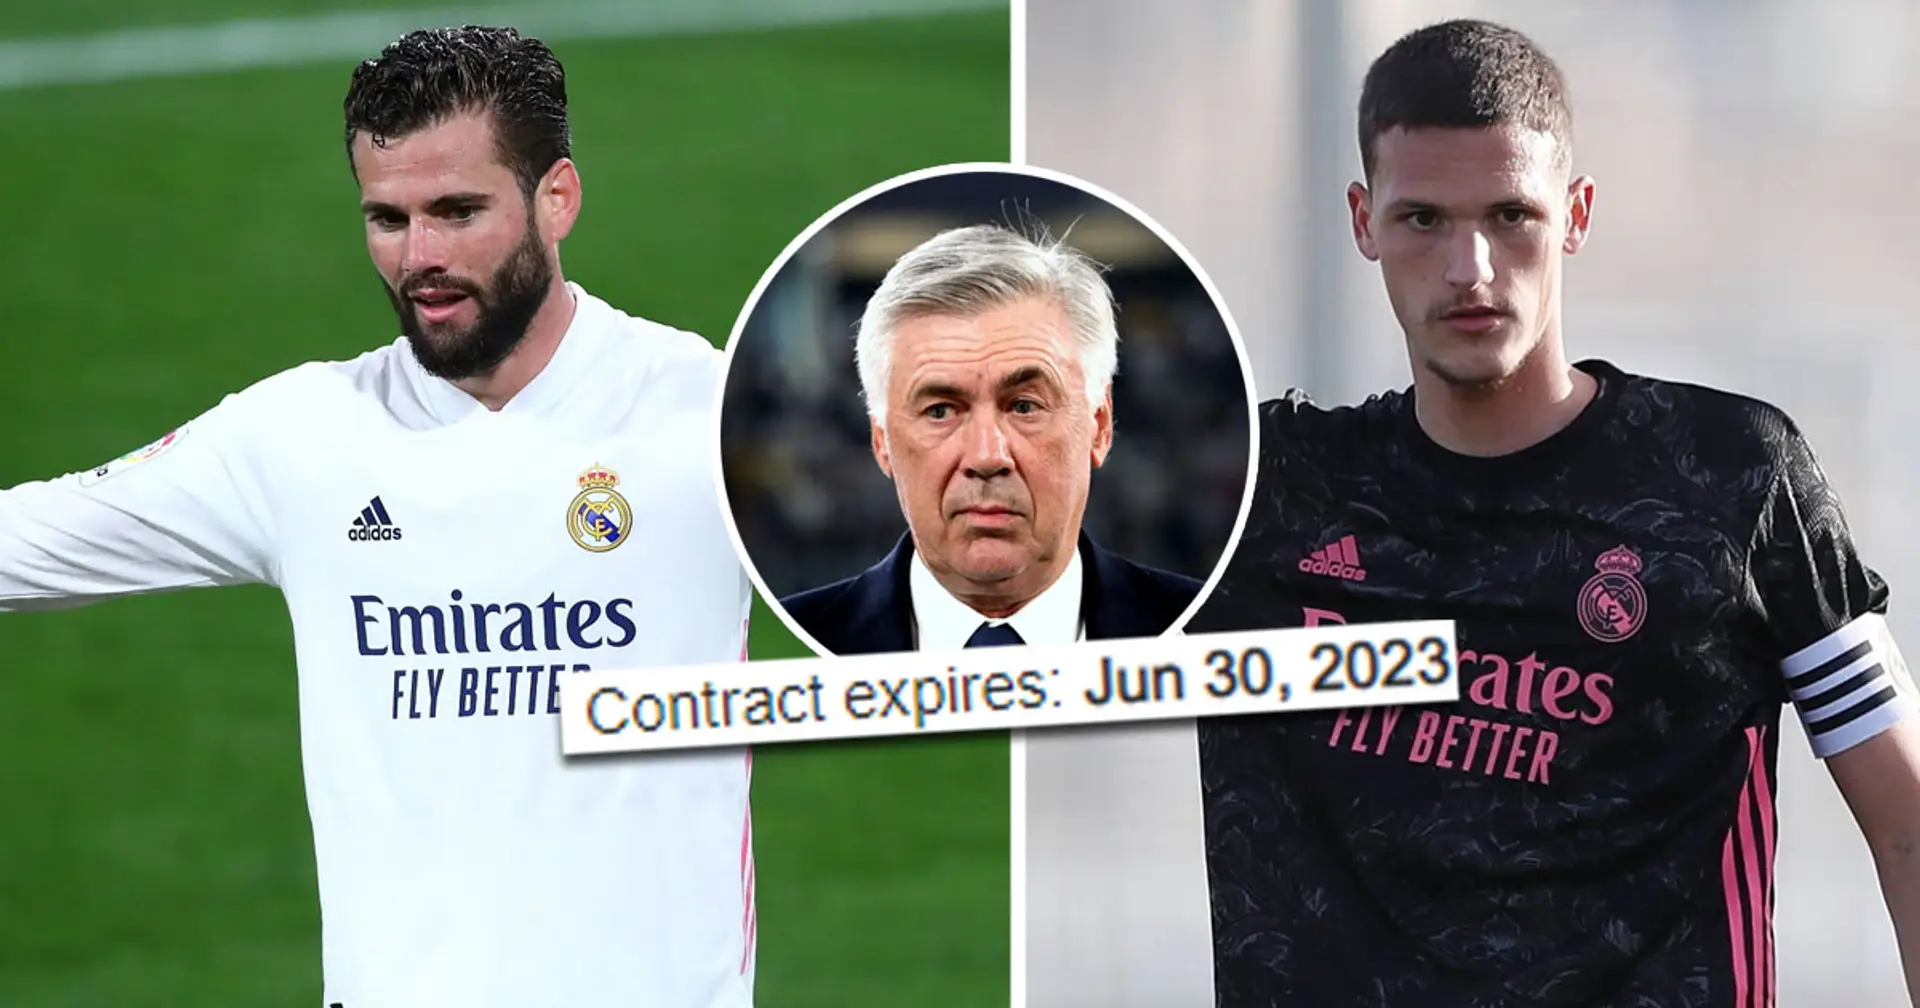 Nacho could leave in January already, Madrid identify replacement at academy (reliability: 4 stars)